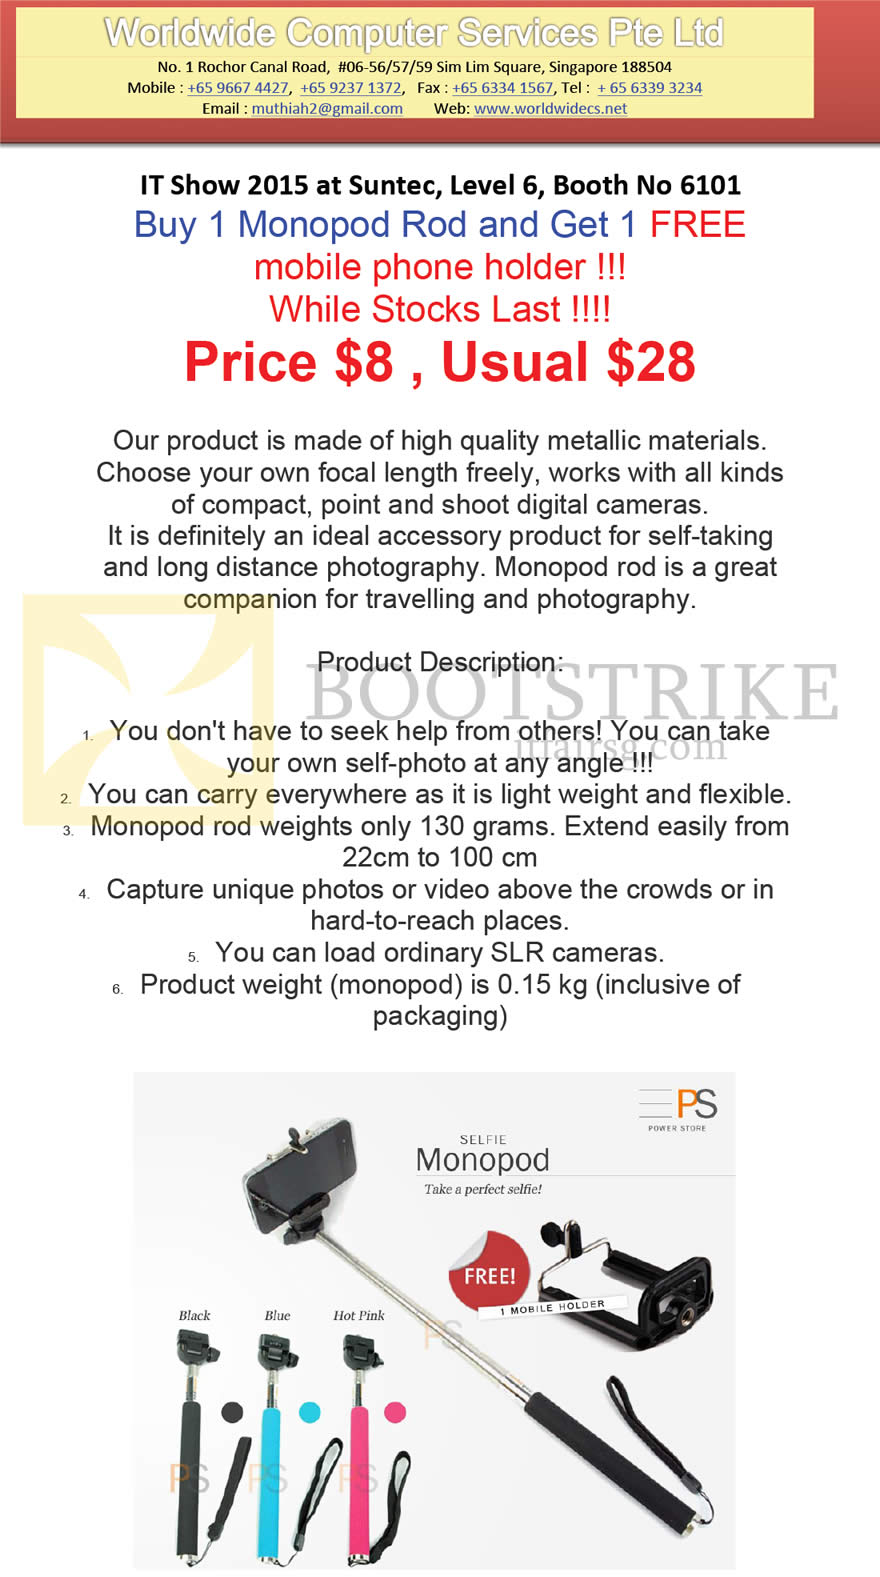 IT SHOW 2015 price list image brochure of Worldwide Computer Services Buy 1 Monopod Rod Get 1 Free